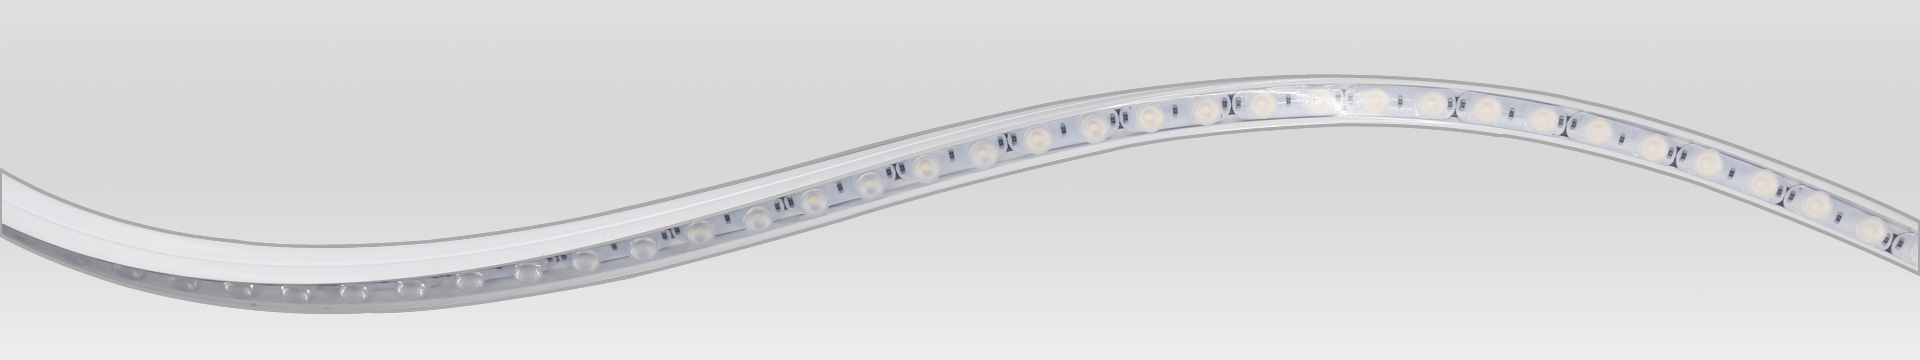 LED Neon Flex Strip that supports forward and side bends - Neon LED Strip Lights